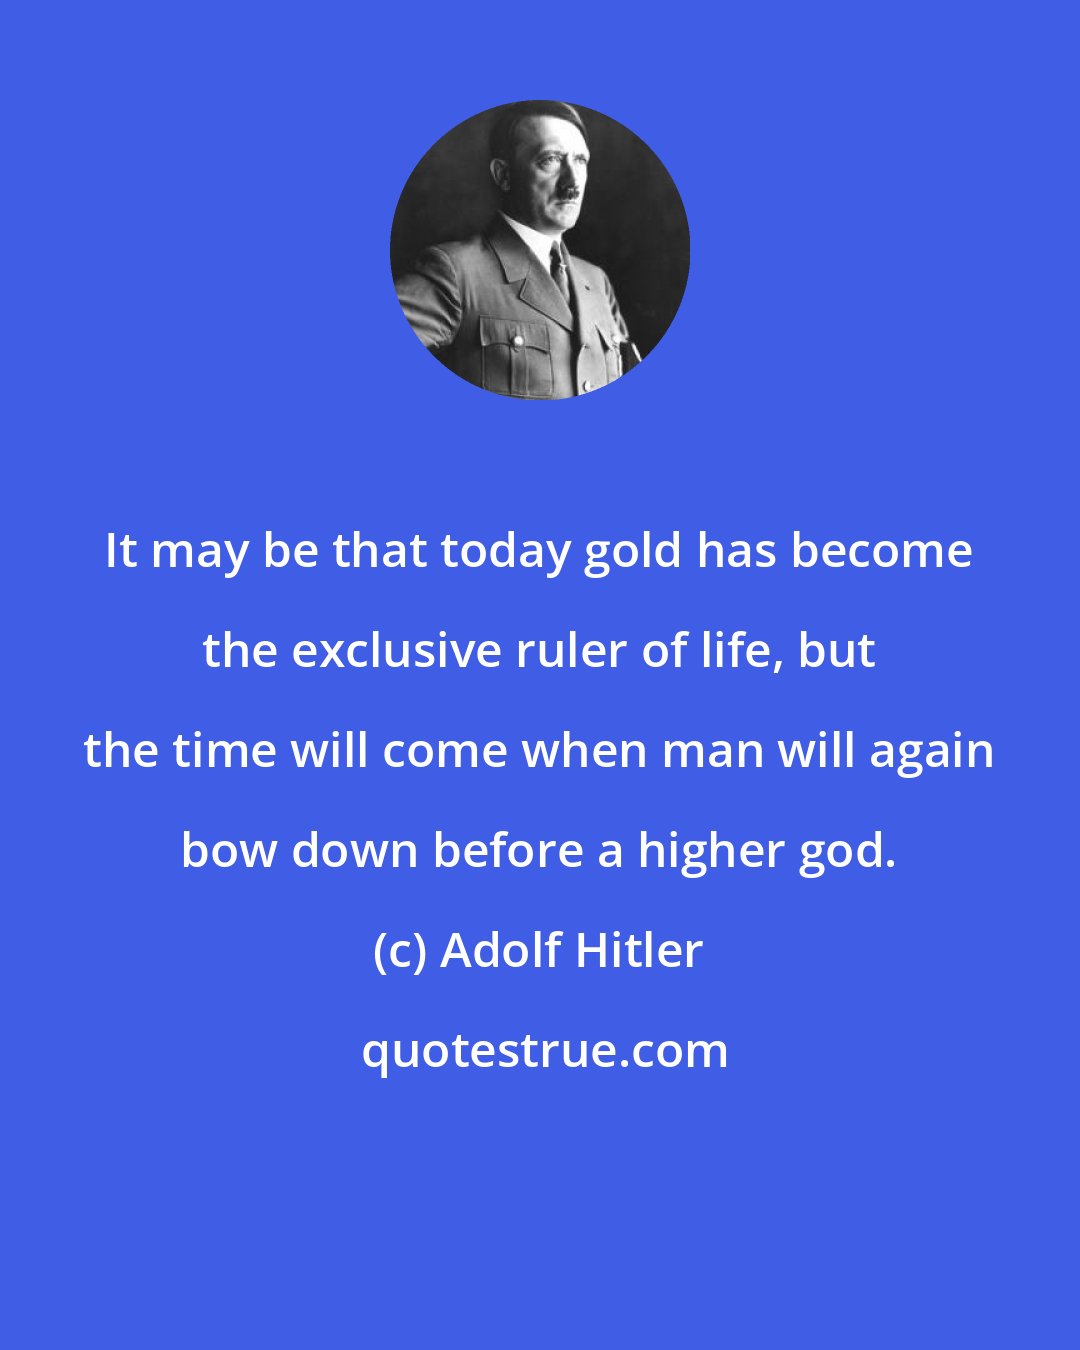 Adolf Hitler: It may be that today gold has become the exclusive ruler of life, but the time will come when man will again bow down before a higher god.